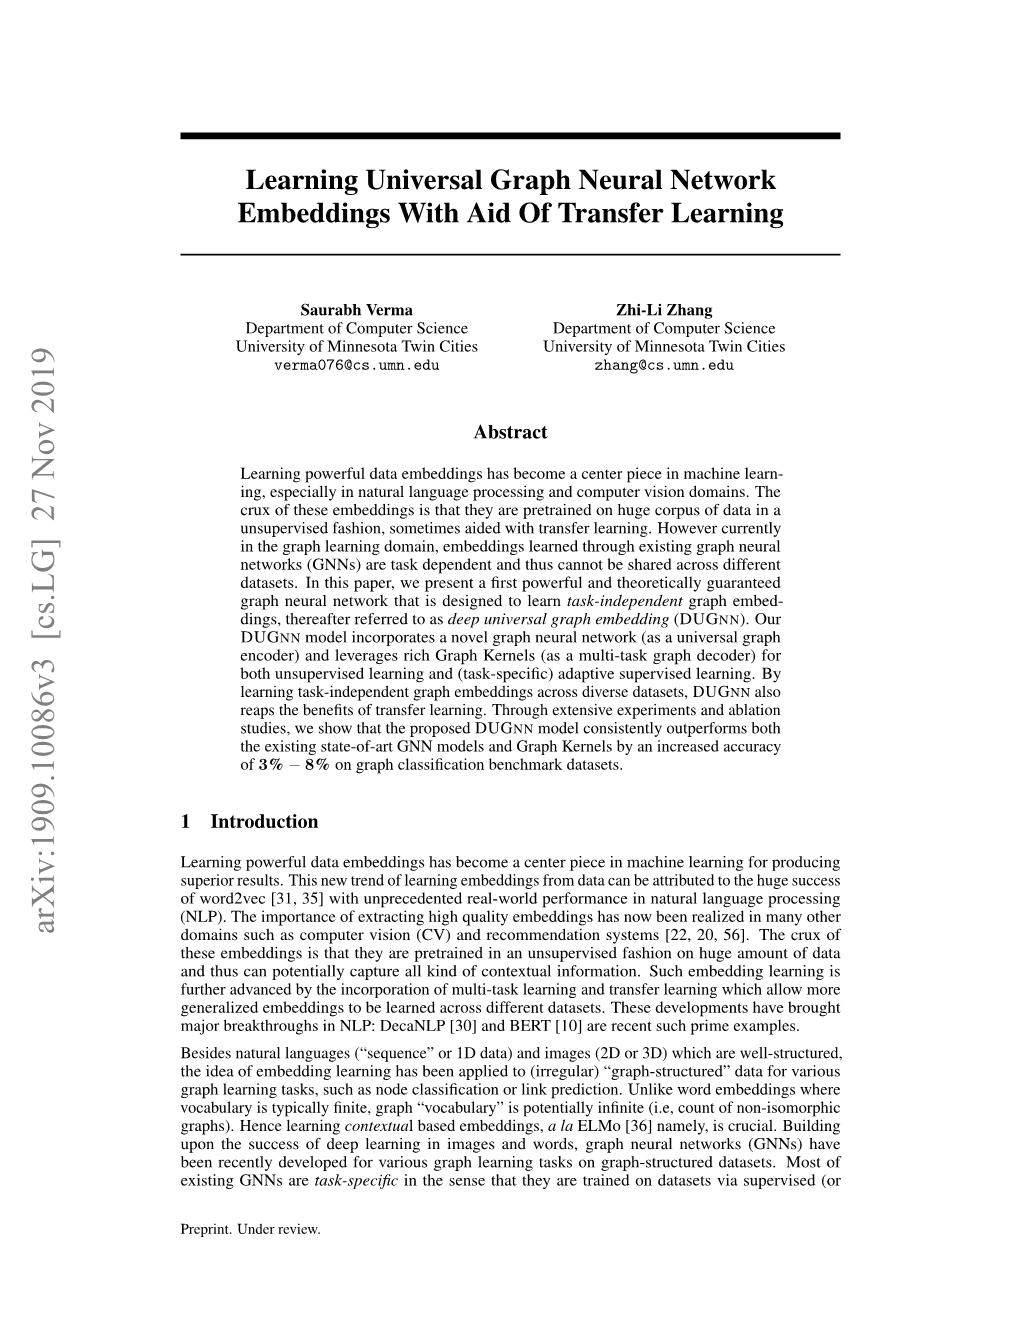 Learning Universal Graph Neural Network Embeddings with Aid of Transfer Learning